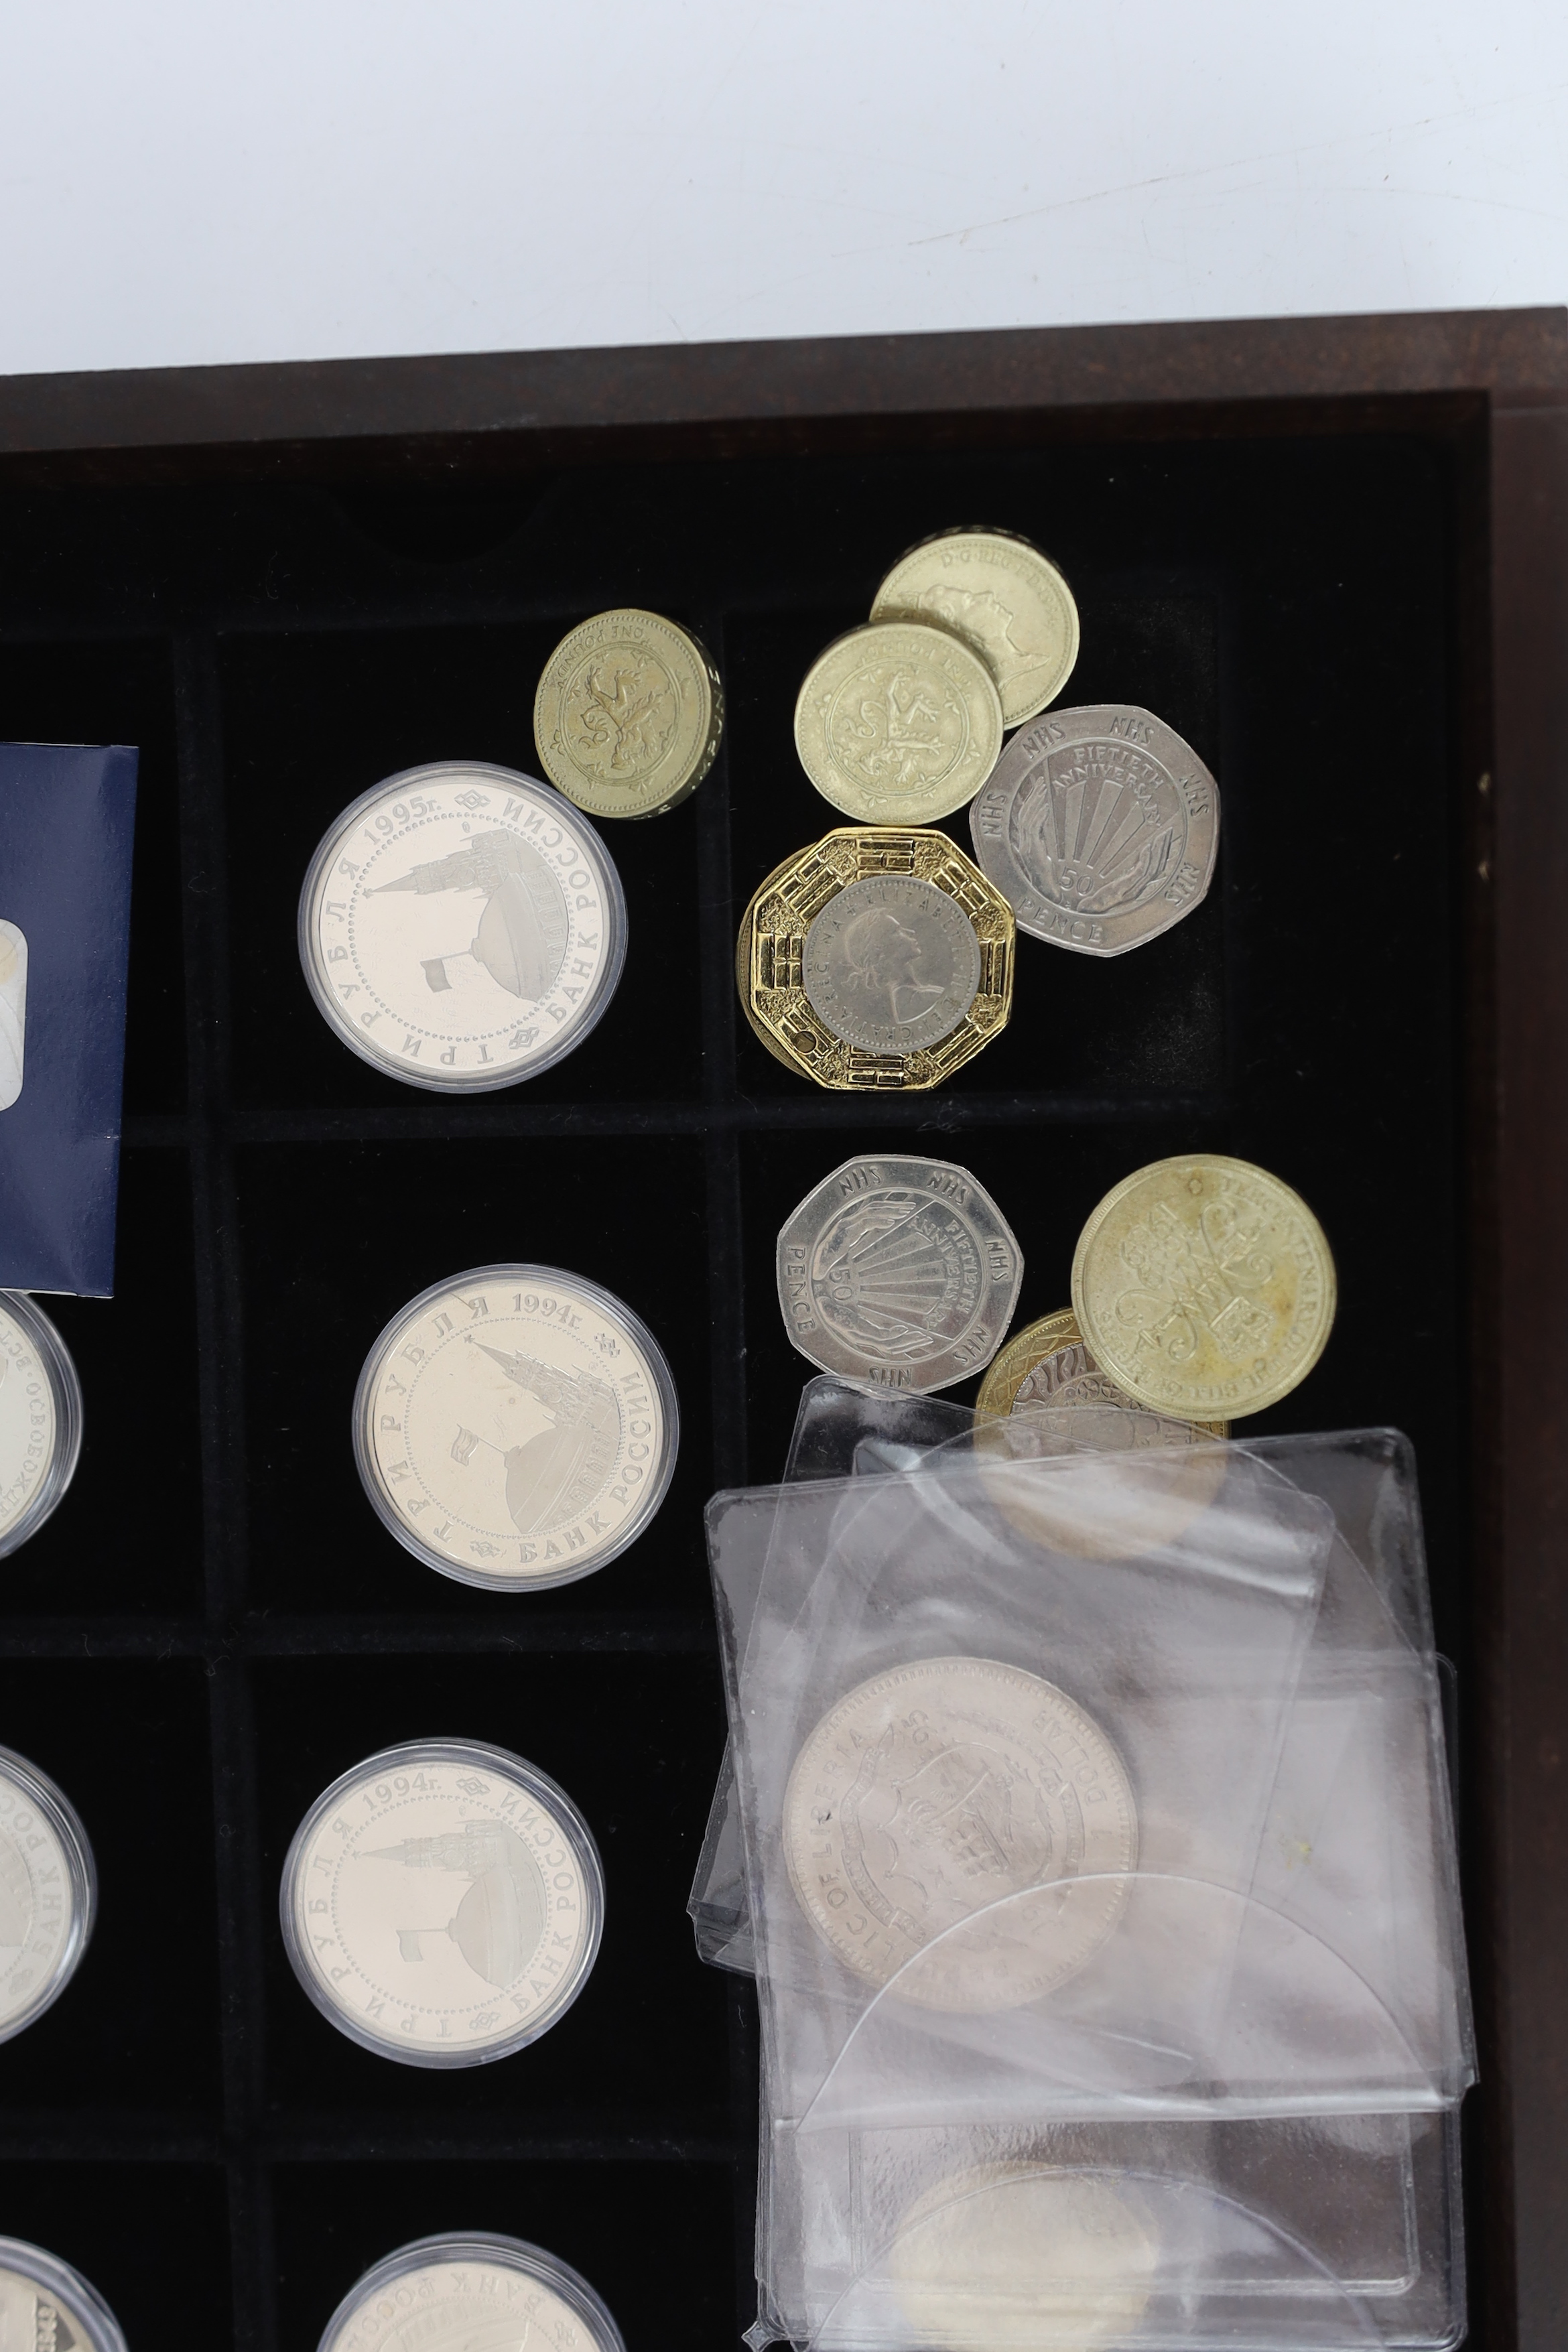 Russian Federation, A collection of 20 proof three rouble coins, 1994 and 1995 and QEII British - Image 2 of 4